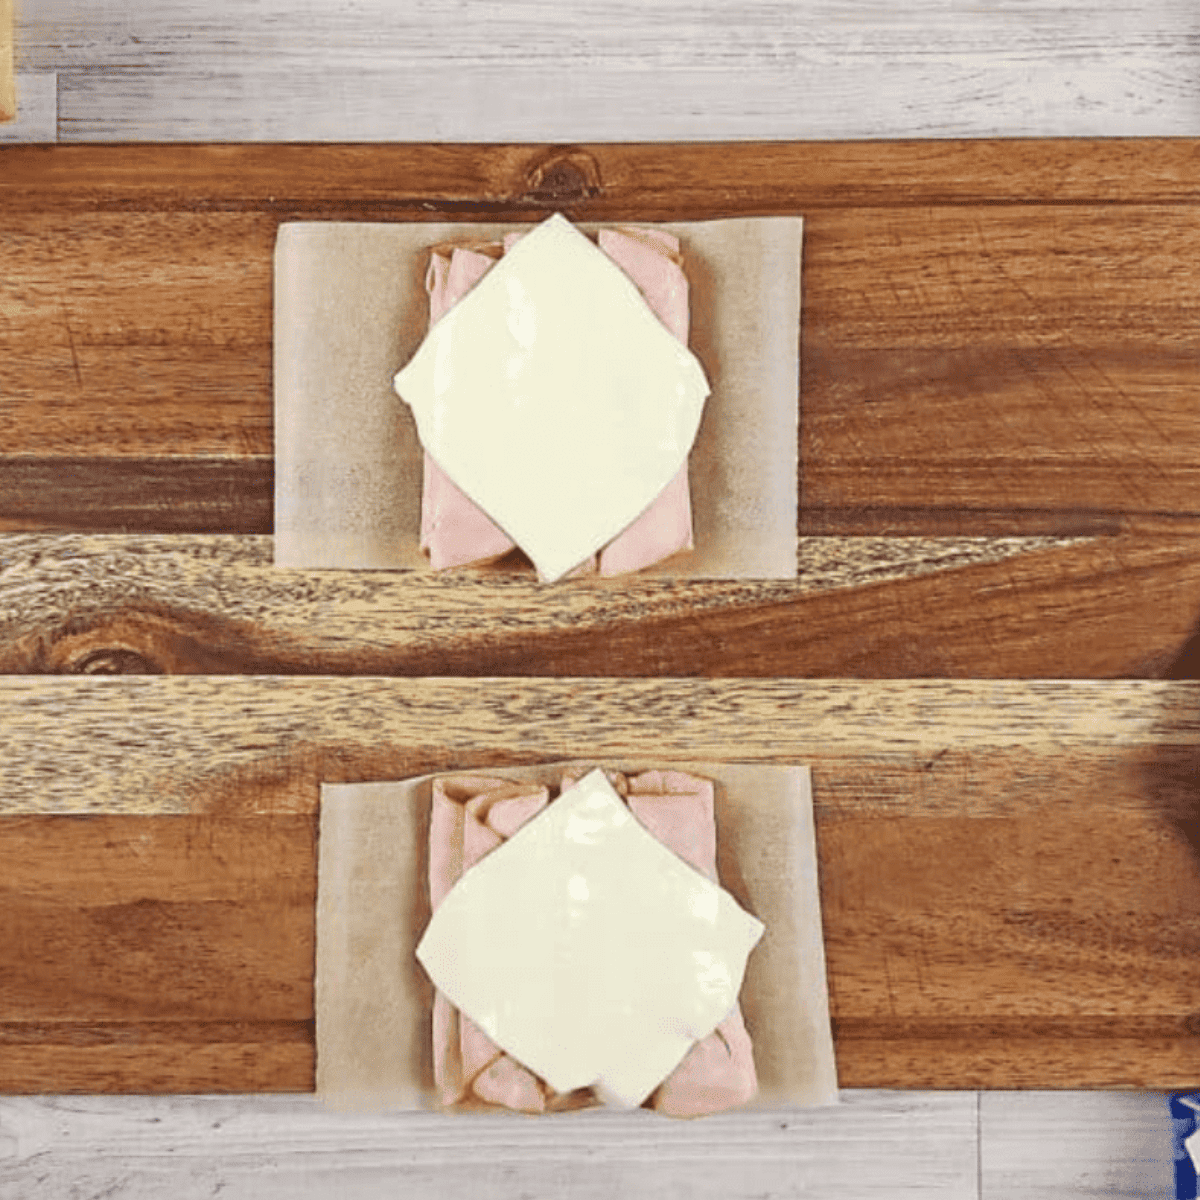 To cook Hardee's Big Hot Ham and Cheese in an air fryer, follow these steps: